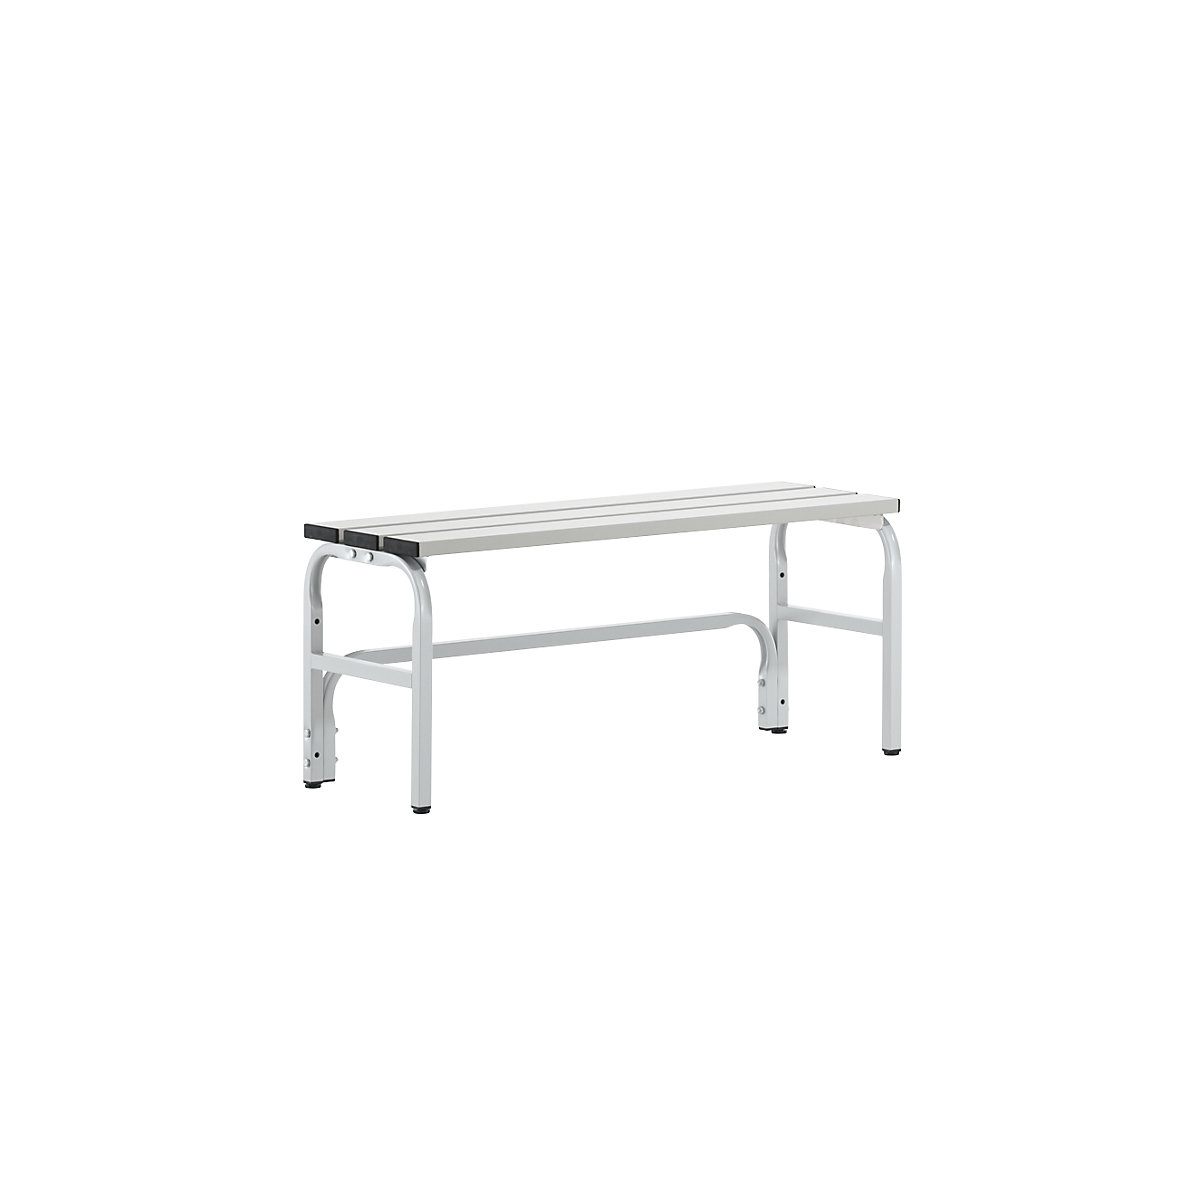 Sypro – Changing room bench with aluminium slats, HxD 450 x 350 mm, length 1015 mm, light grey